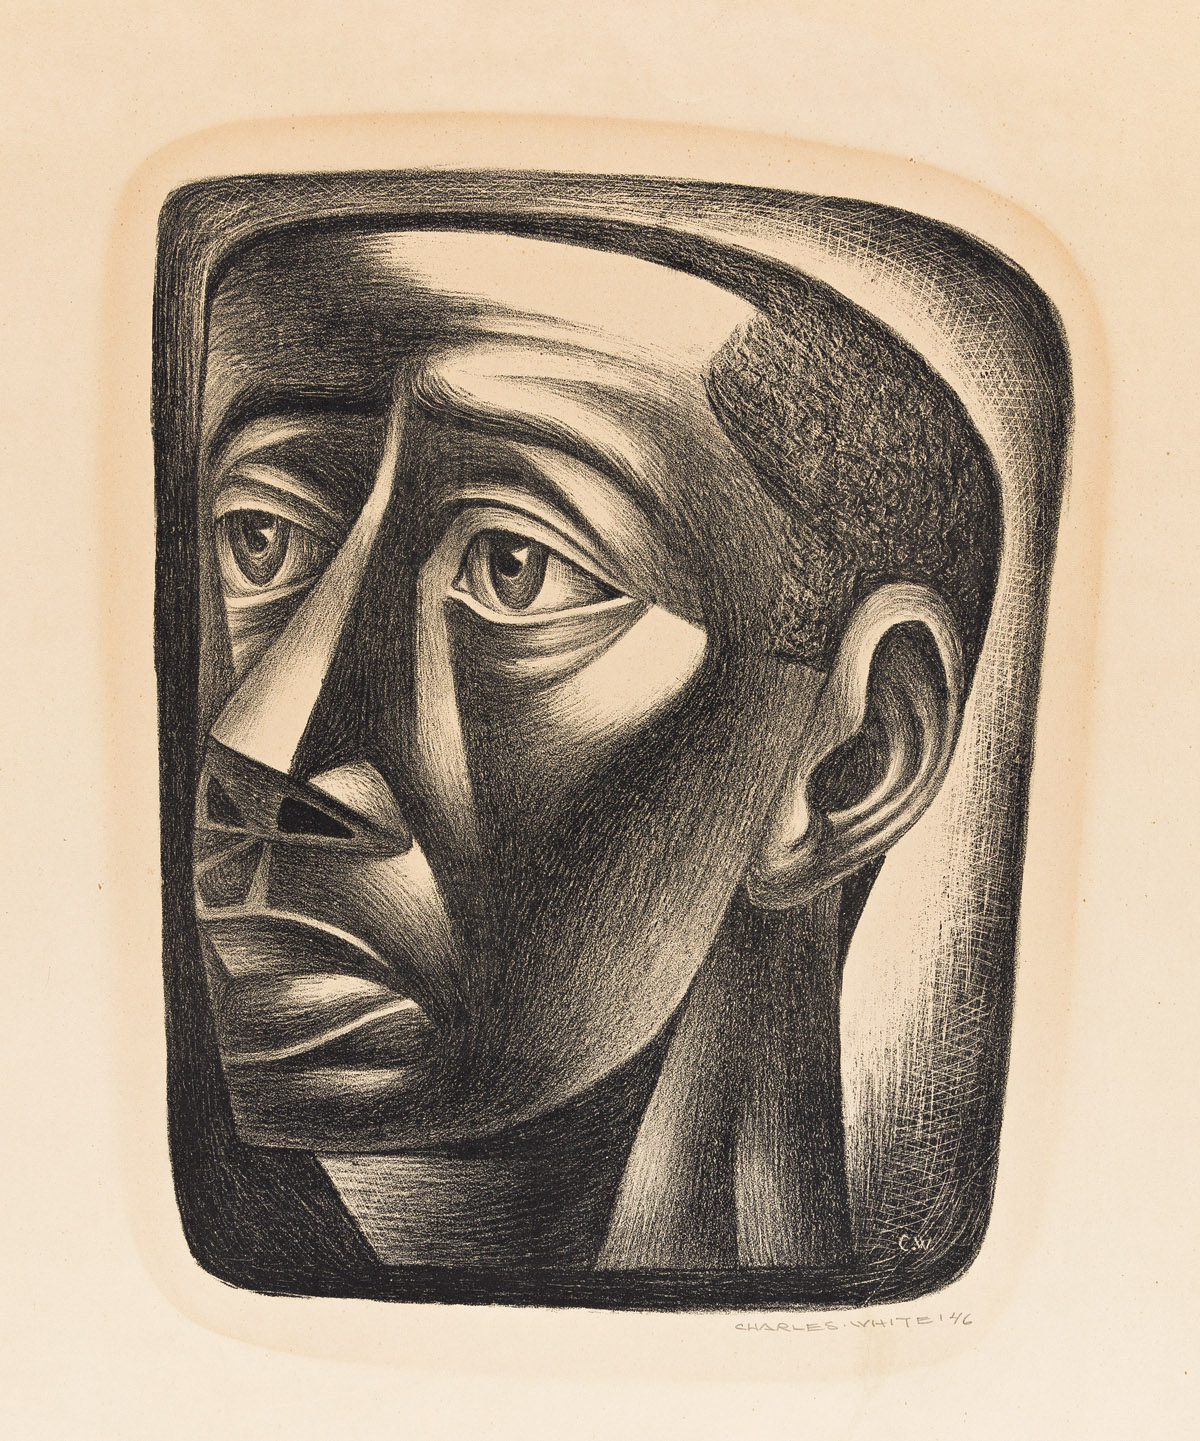 CHARLES WHITE (1918 - 1979) Joven (Youth).